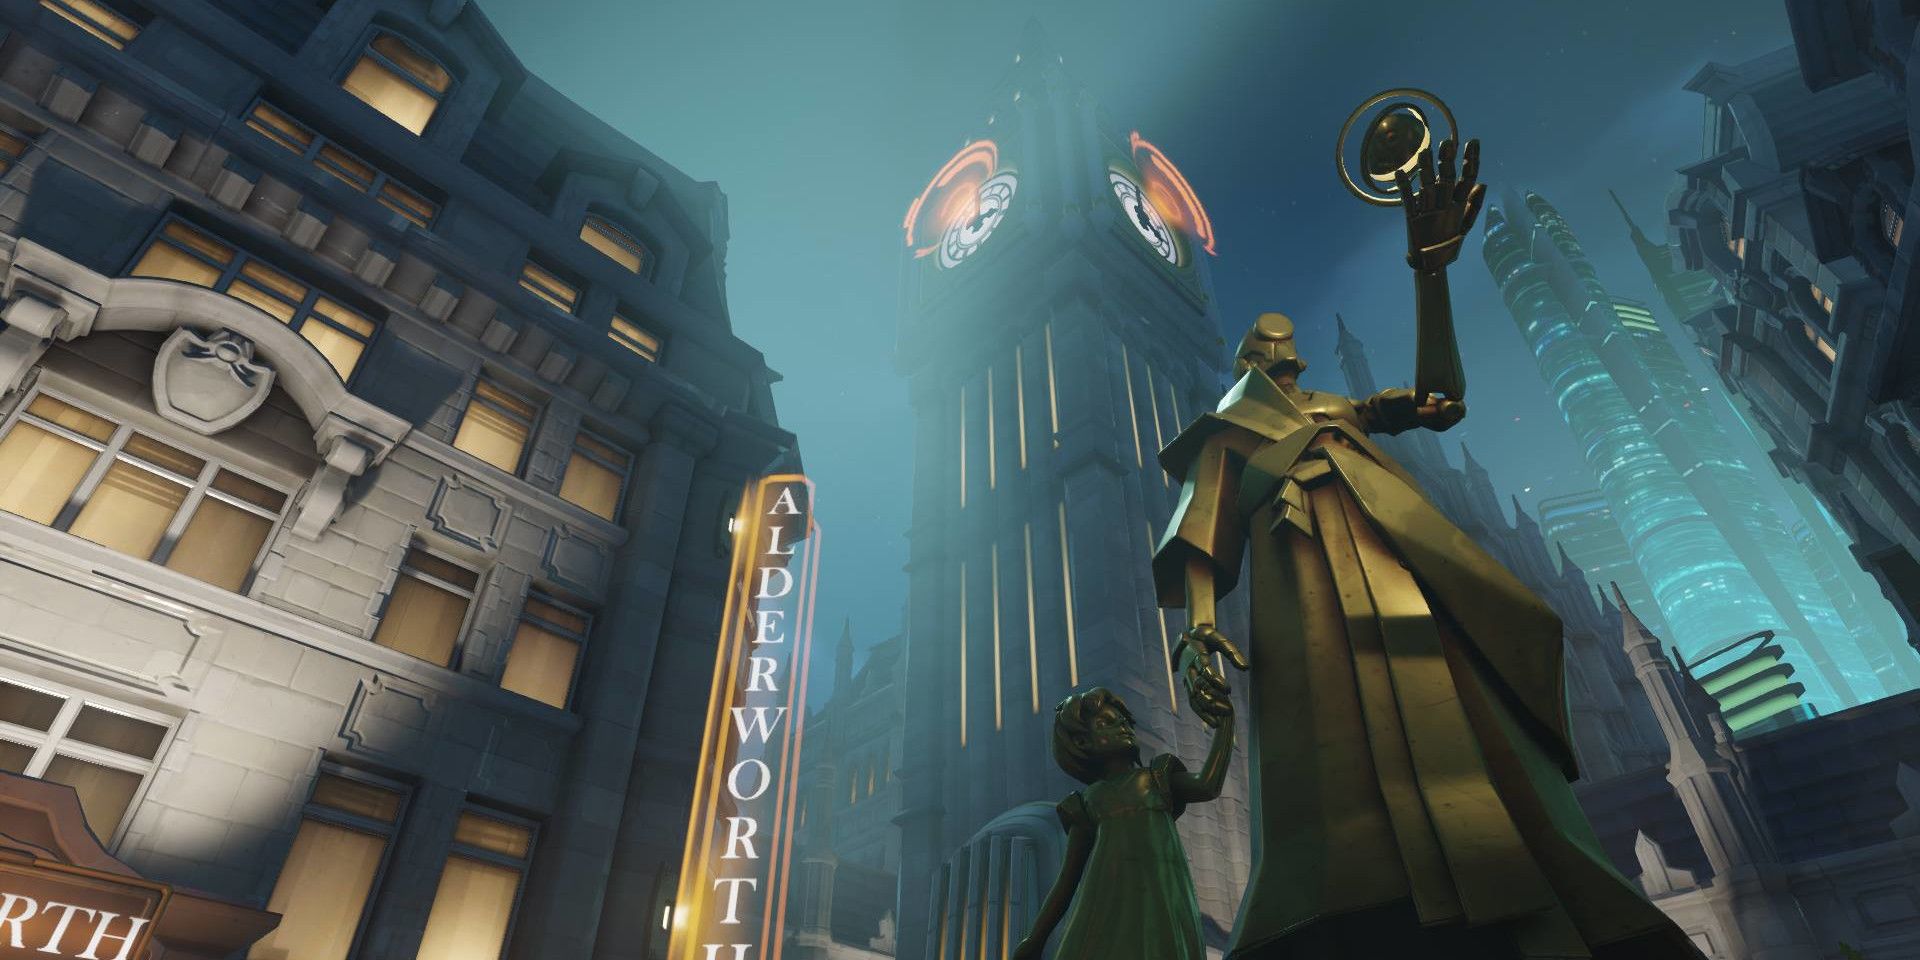 The King's Row clock tower in Overwatch